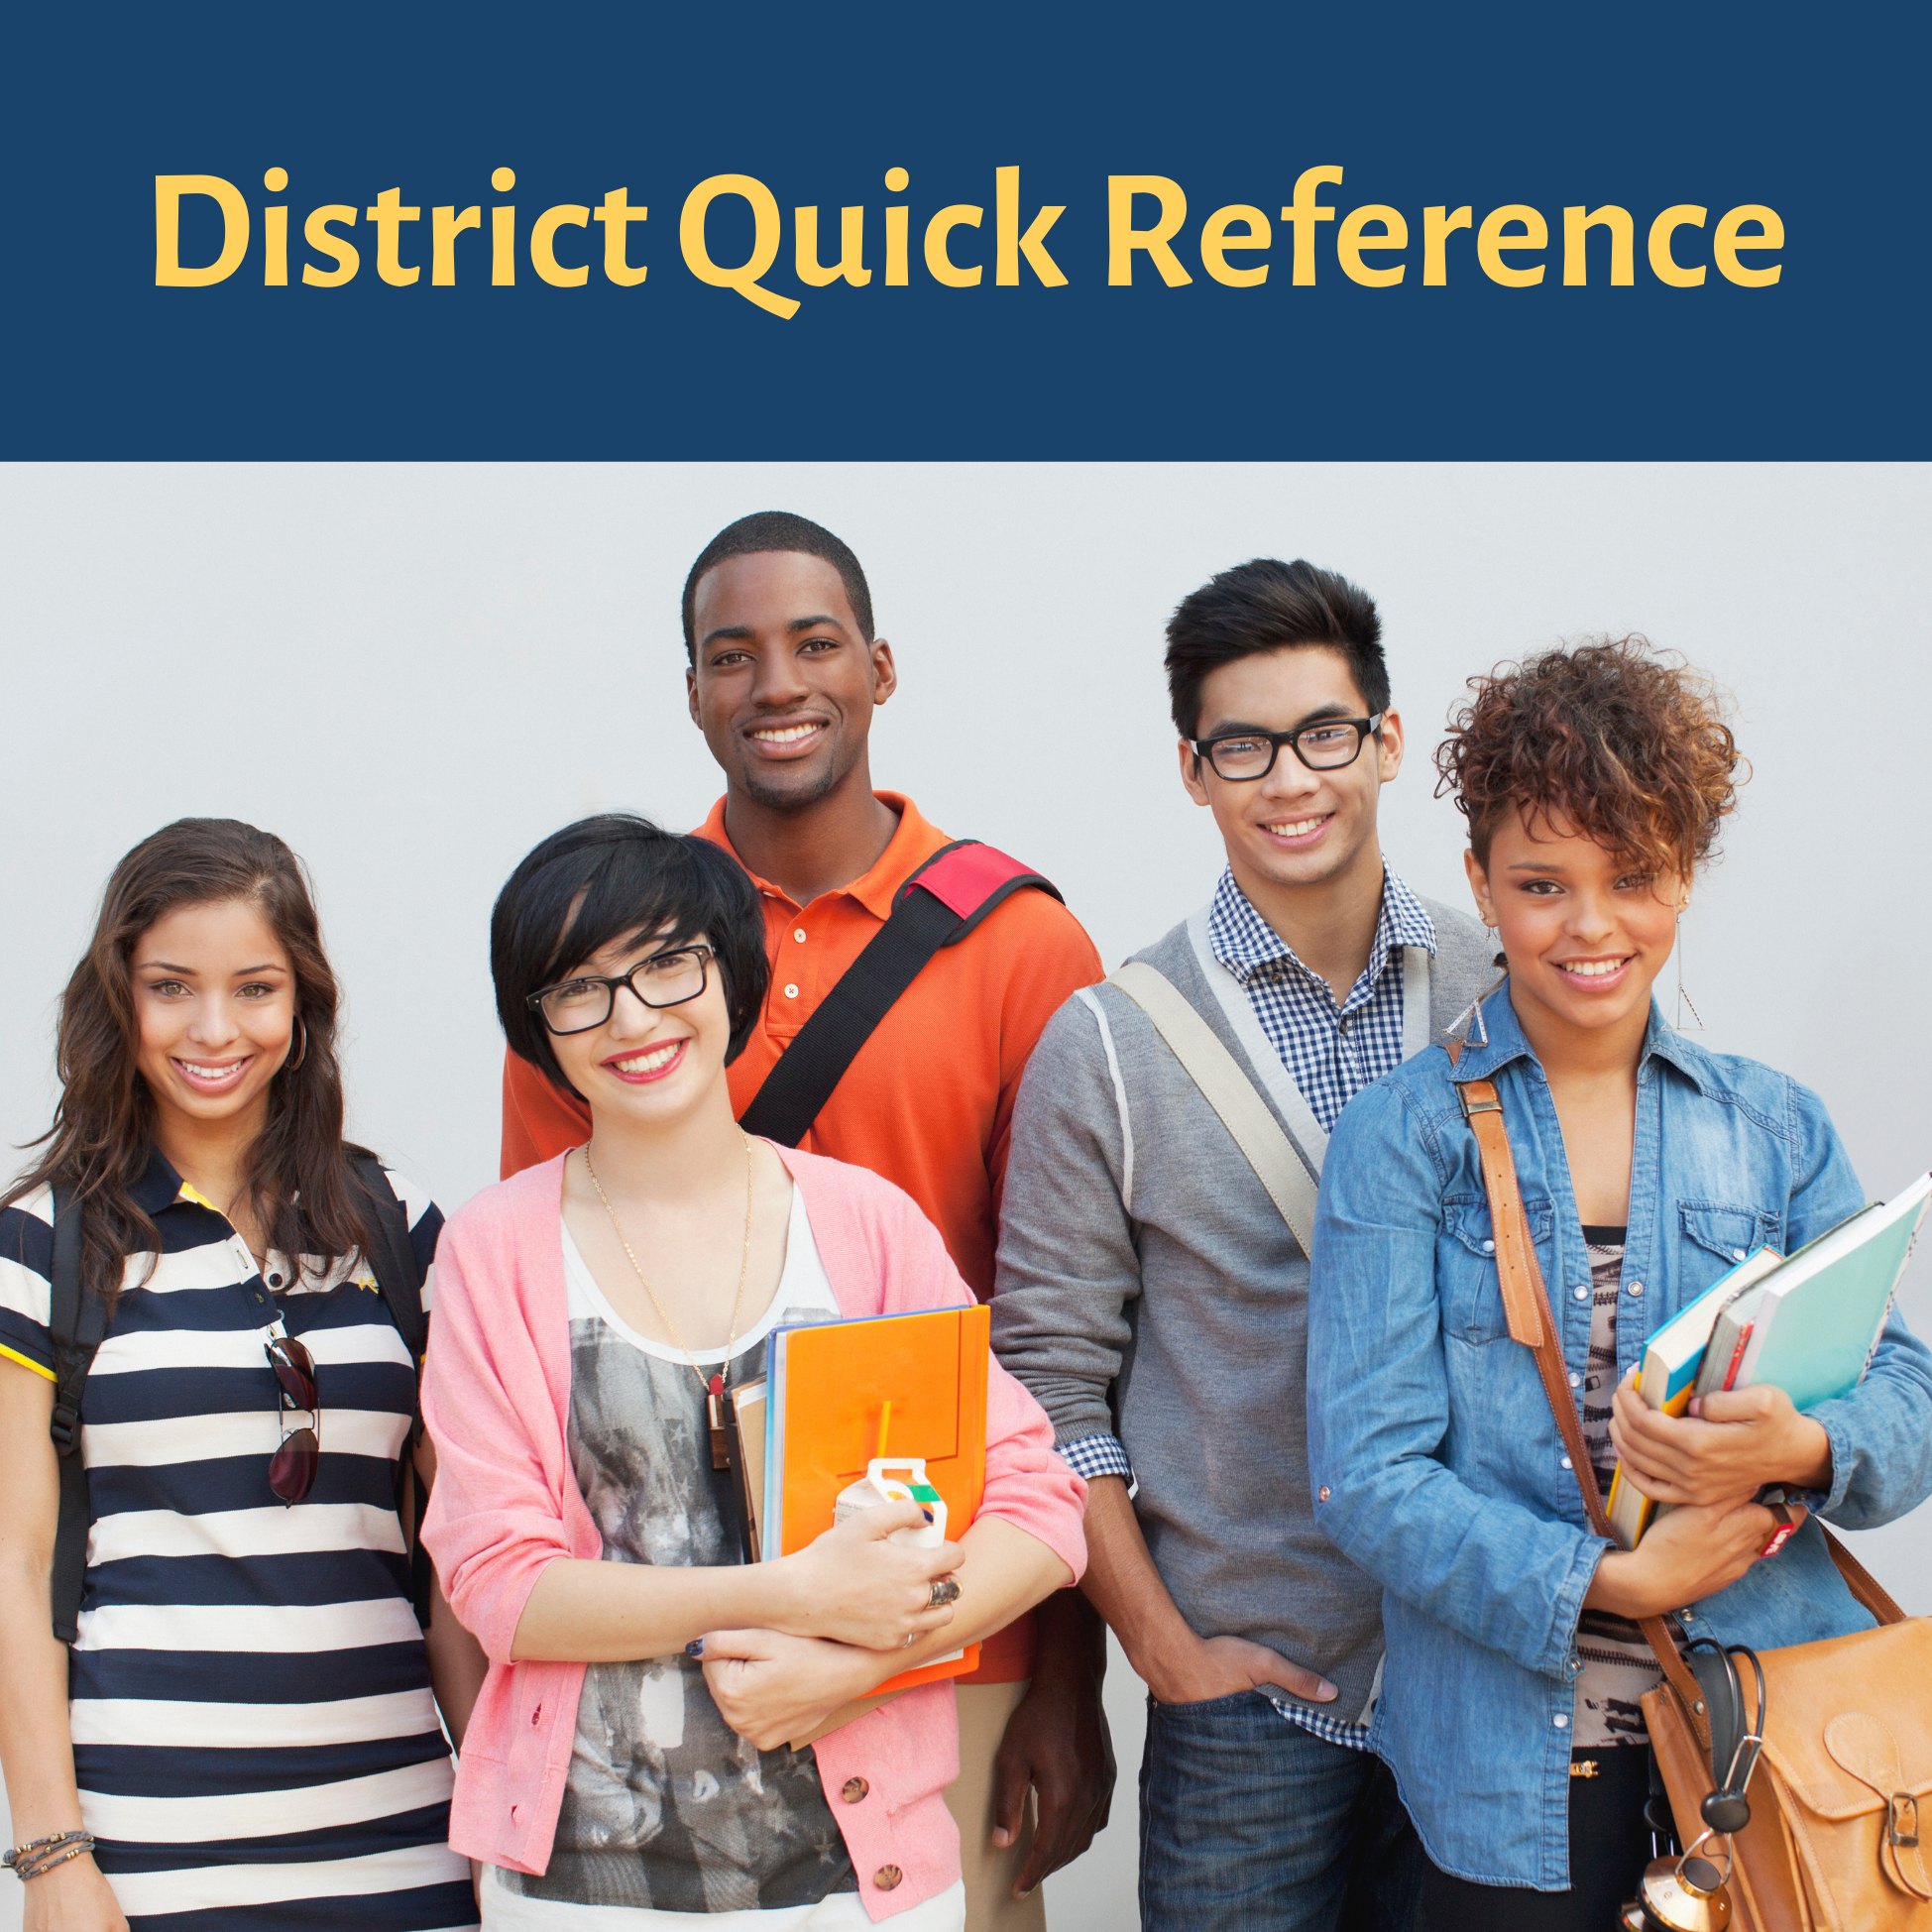 District Quick Reference guide